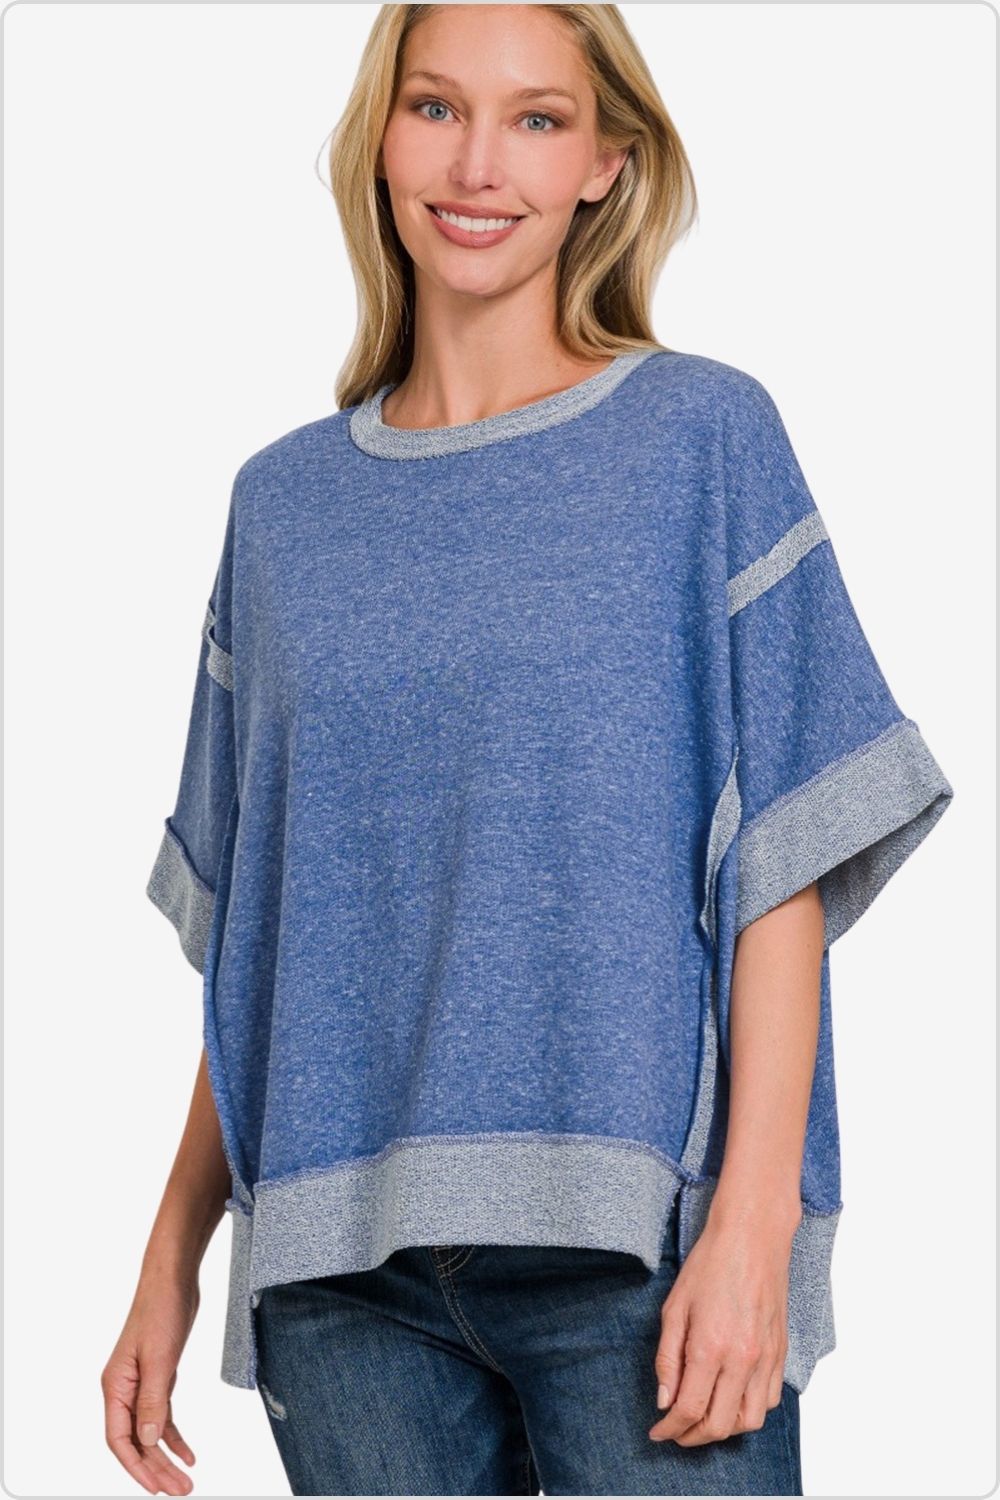 Woman in a blue drop-shoulder t-shirt with contrasting gray trim.